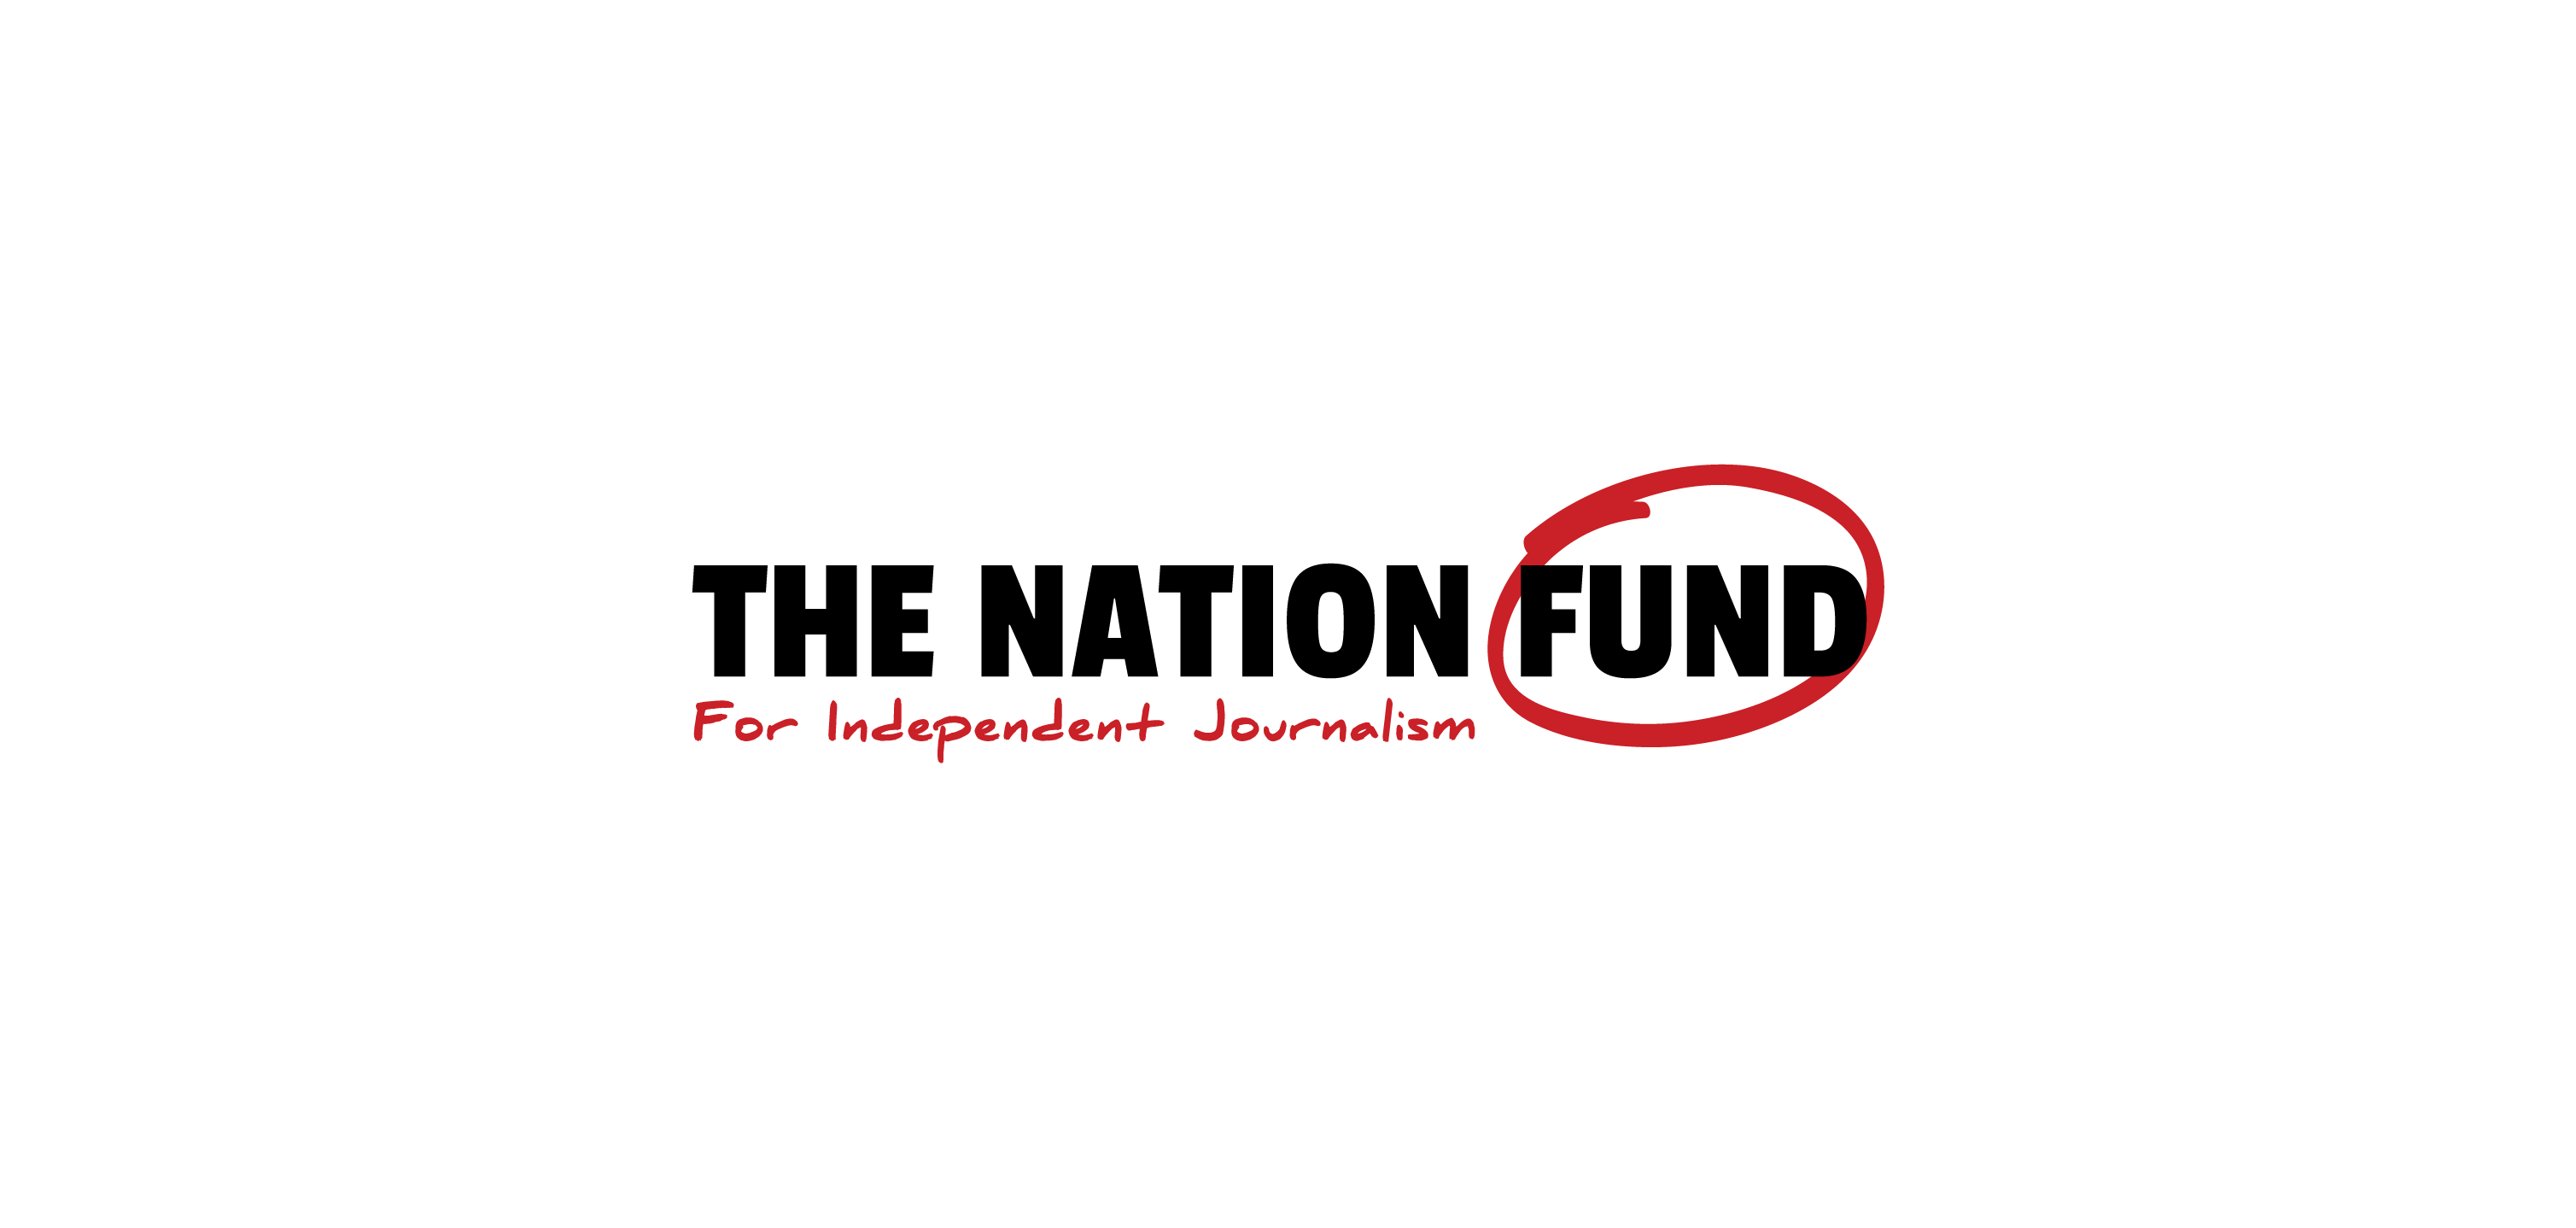 The Nation Fund for Independent Journalism